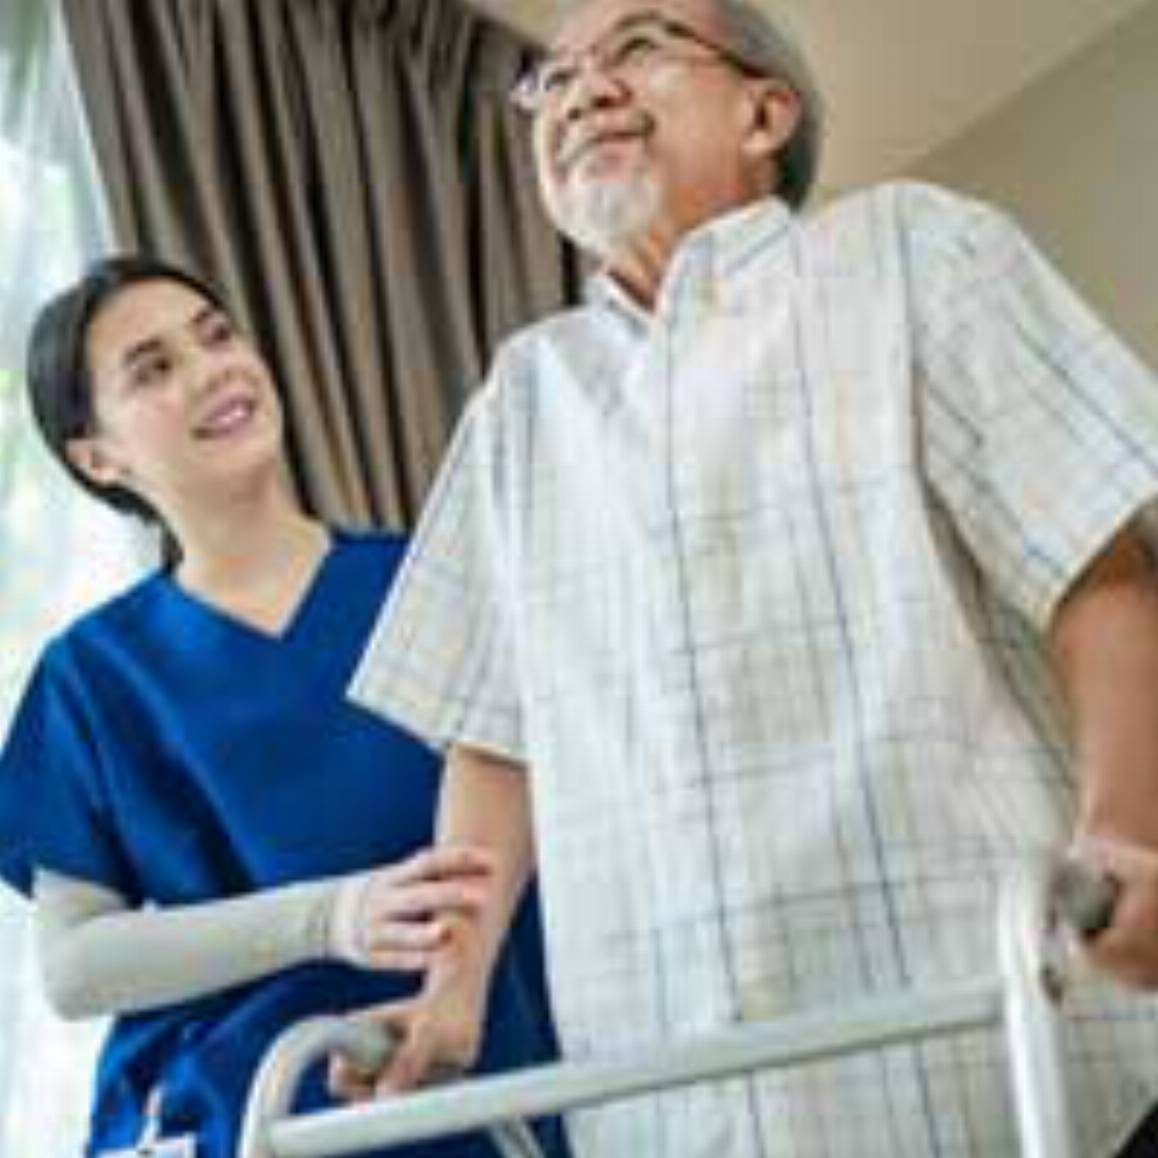 Home Health Aide helping patient